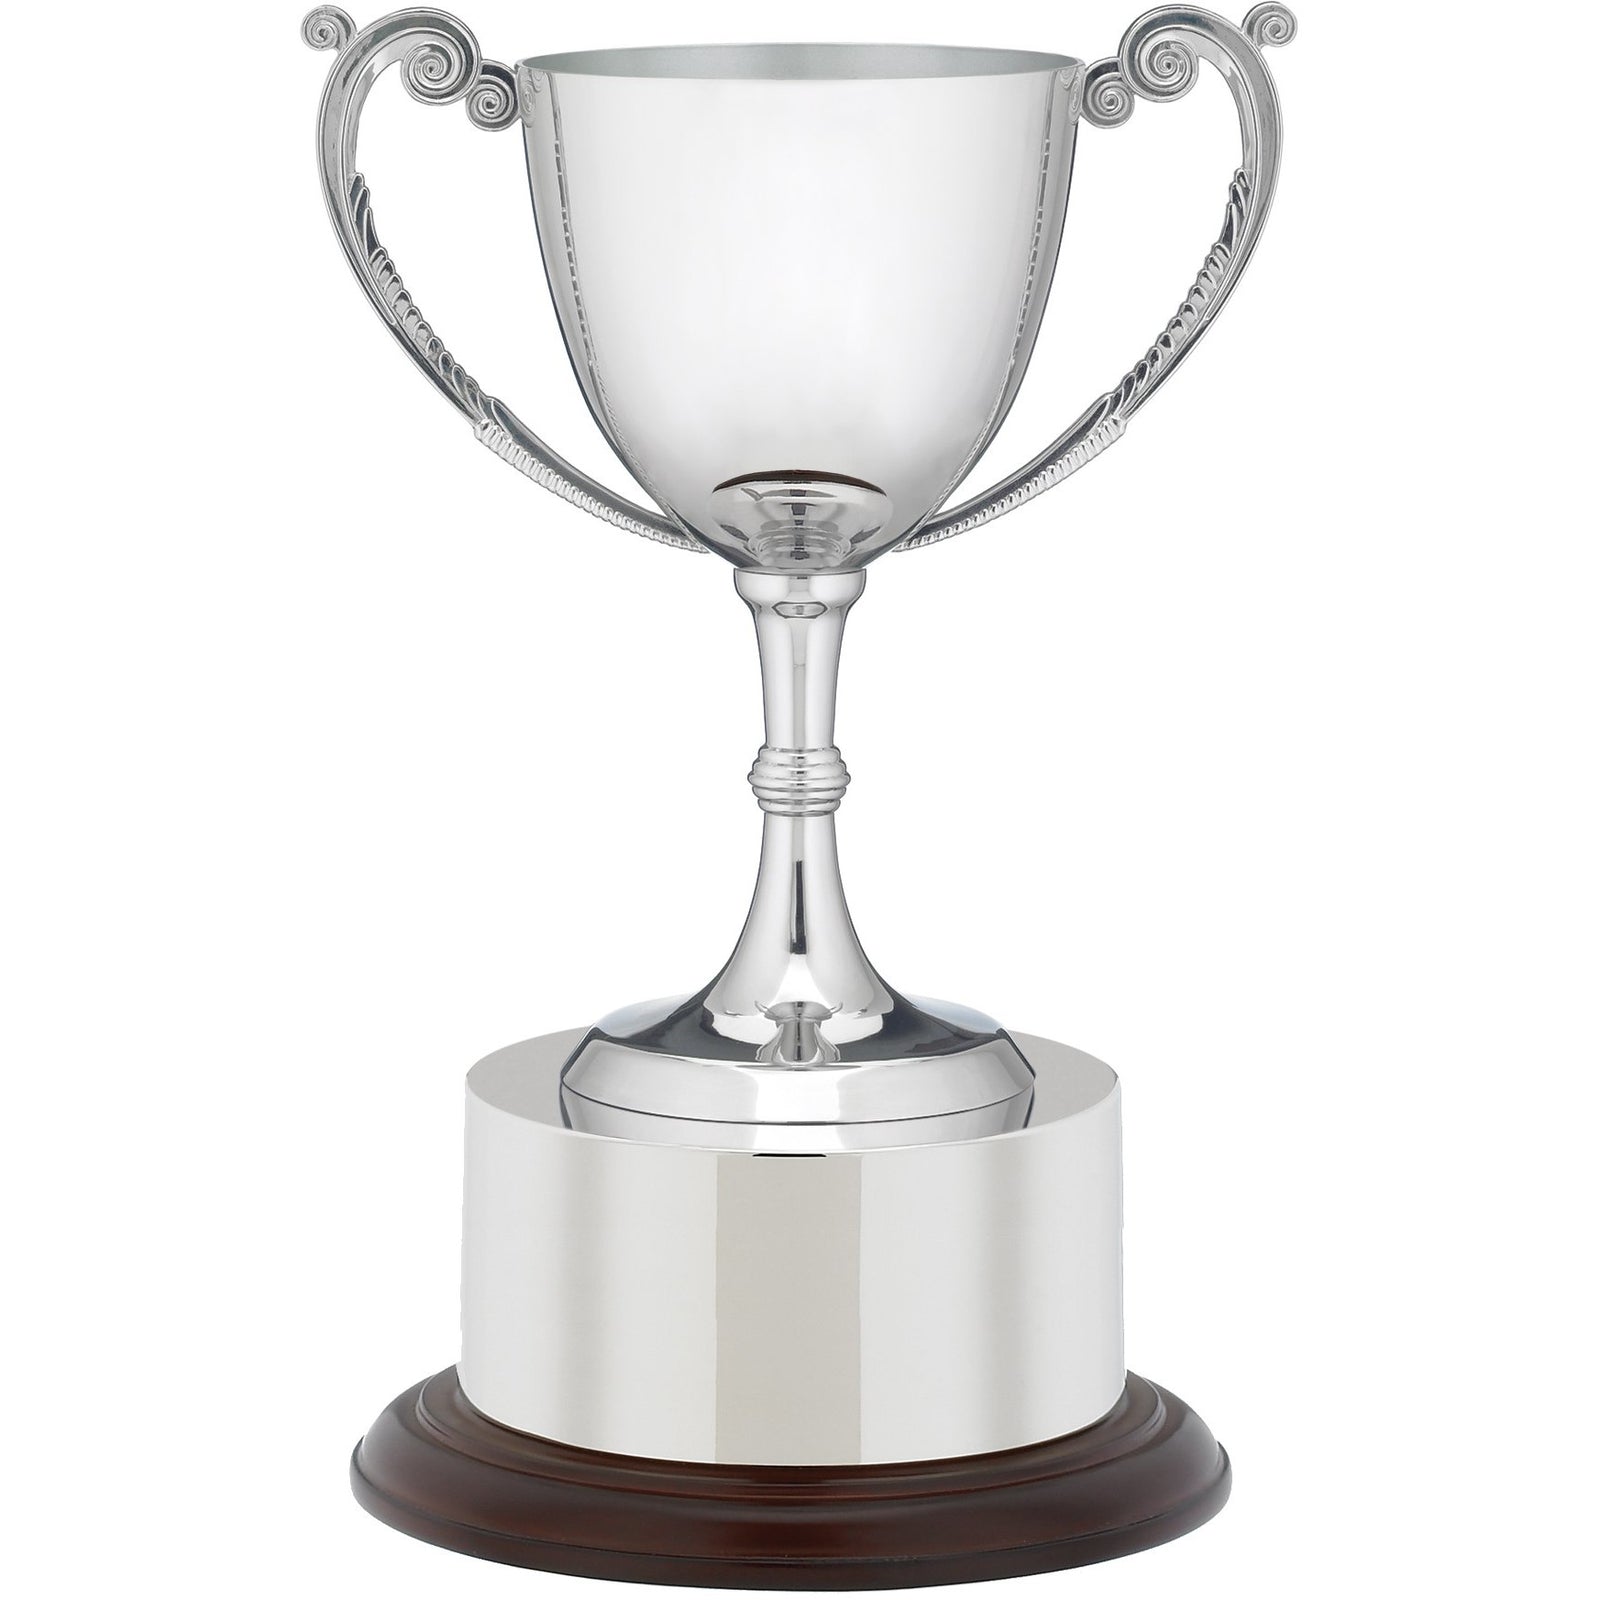 Recognition Silver Nickel Plated Presentation Cup with Wooden Base and Plinth Band 17cm (6.75